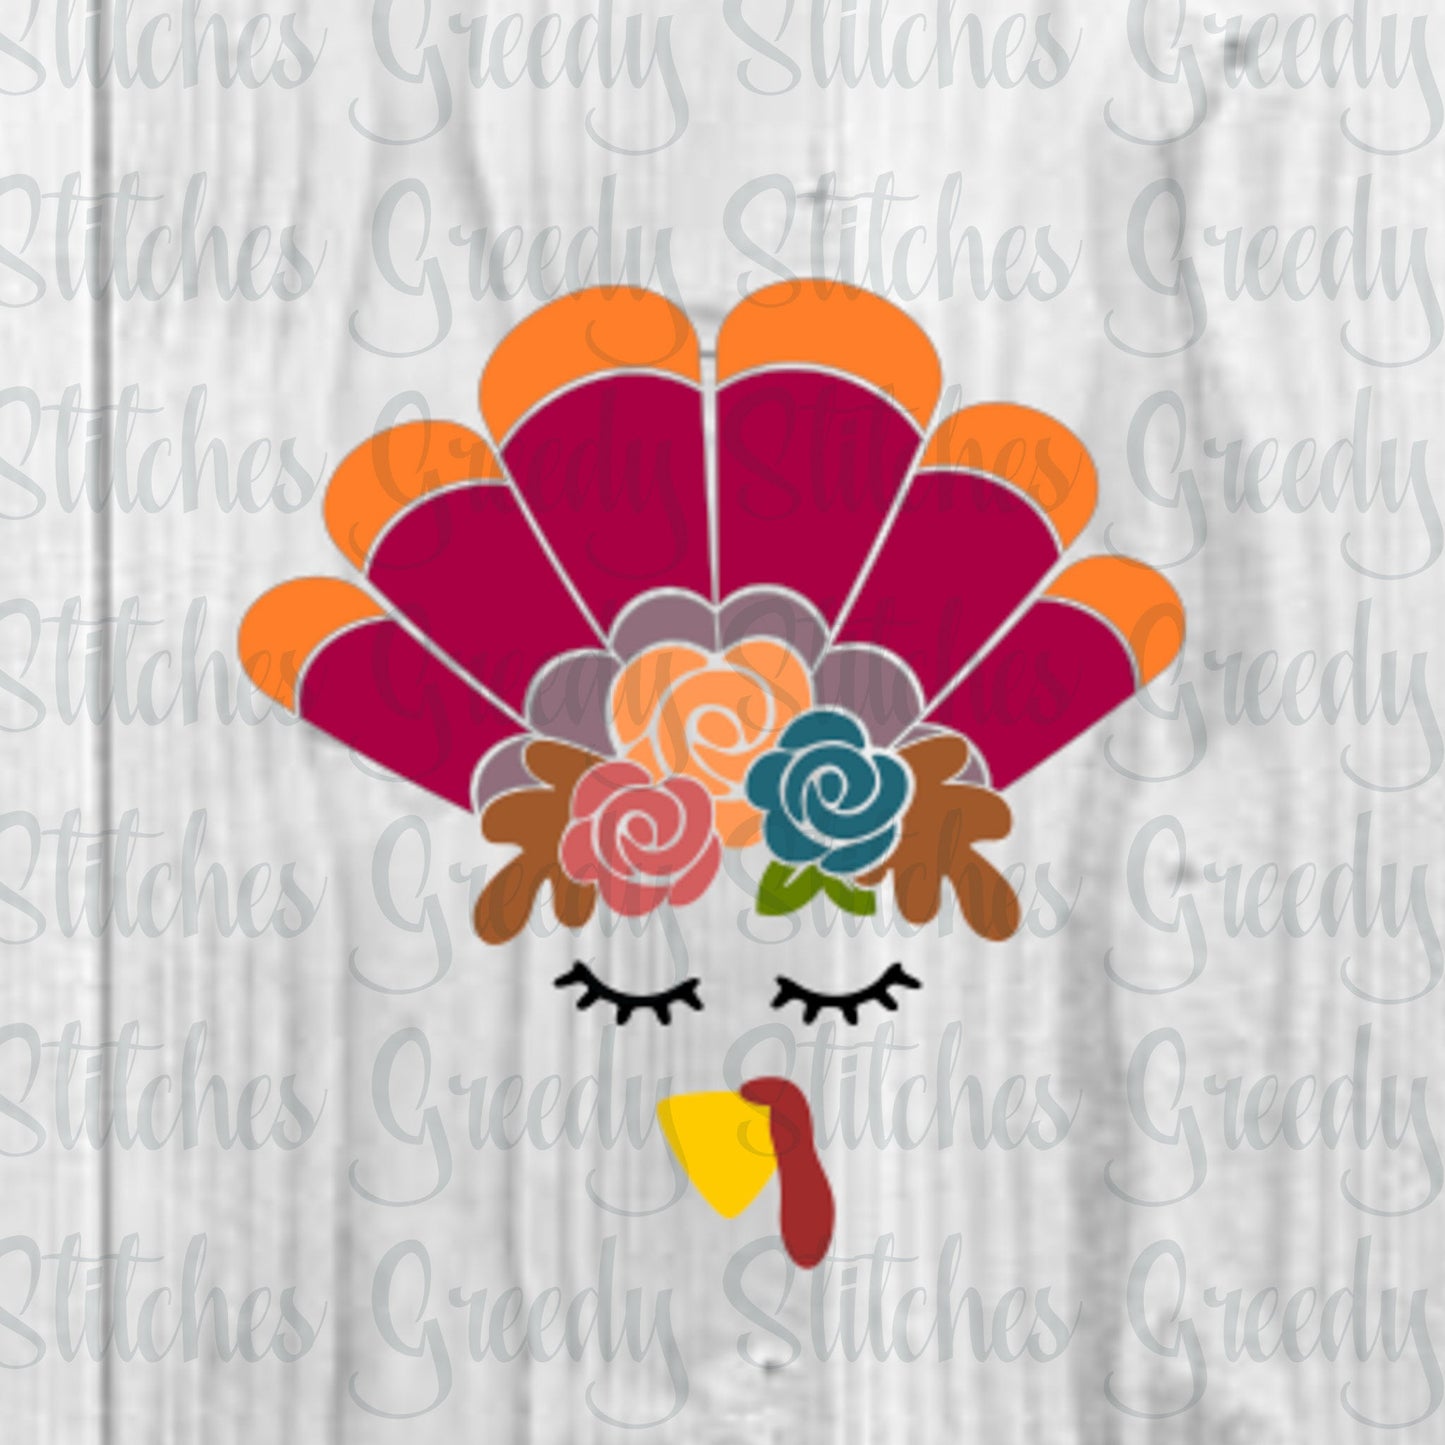 Turkey Face and Tail with Flowers svg dxf eps png. Thanksgiving SvG | Thanksgiving DxF | Thanksgiving Turkey SvG | Instant Download Cut File